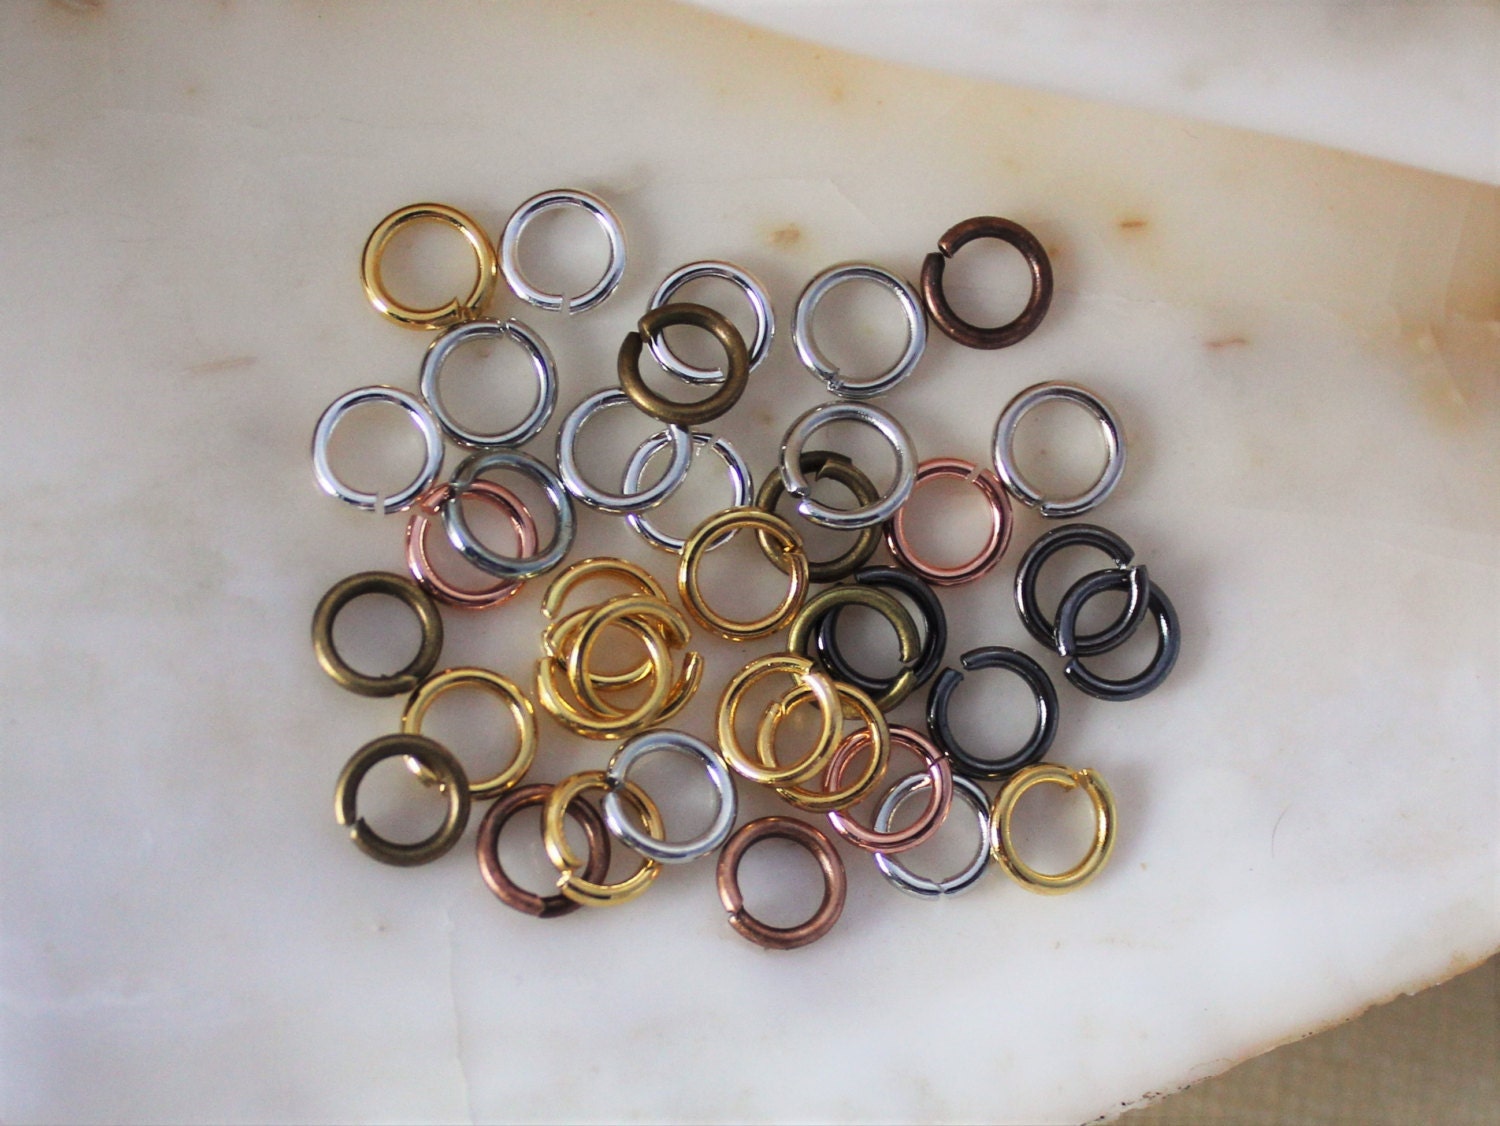 3000pcs 4mm Open Jump Rings O Ring Connectors for DIY Jewelry Making, 6 Colors - Multicolor